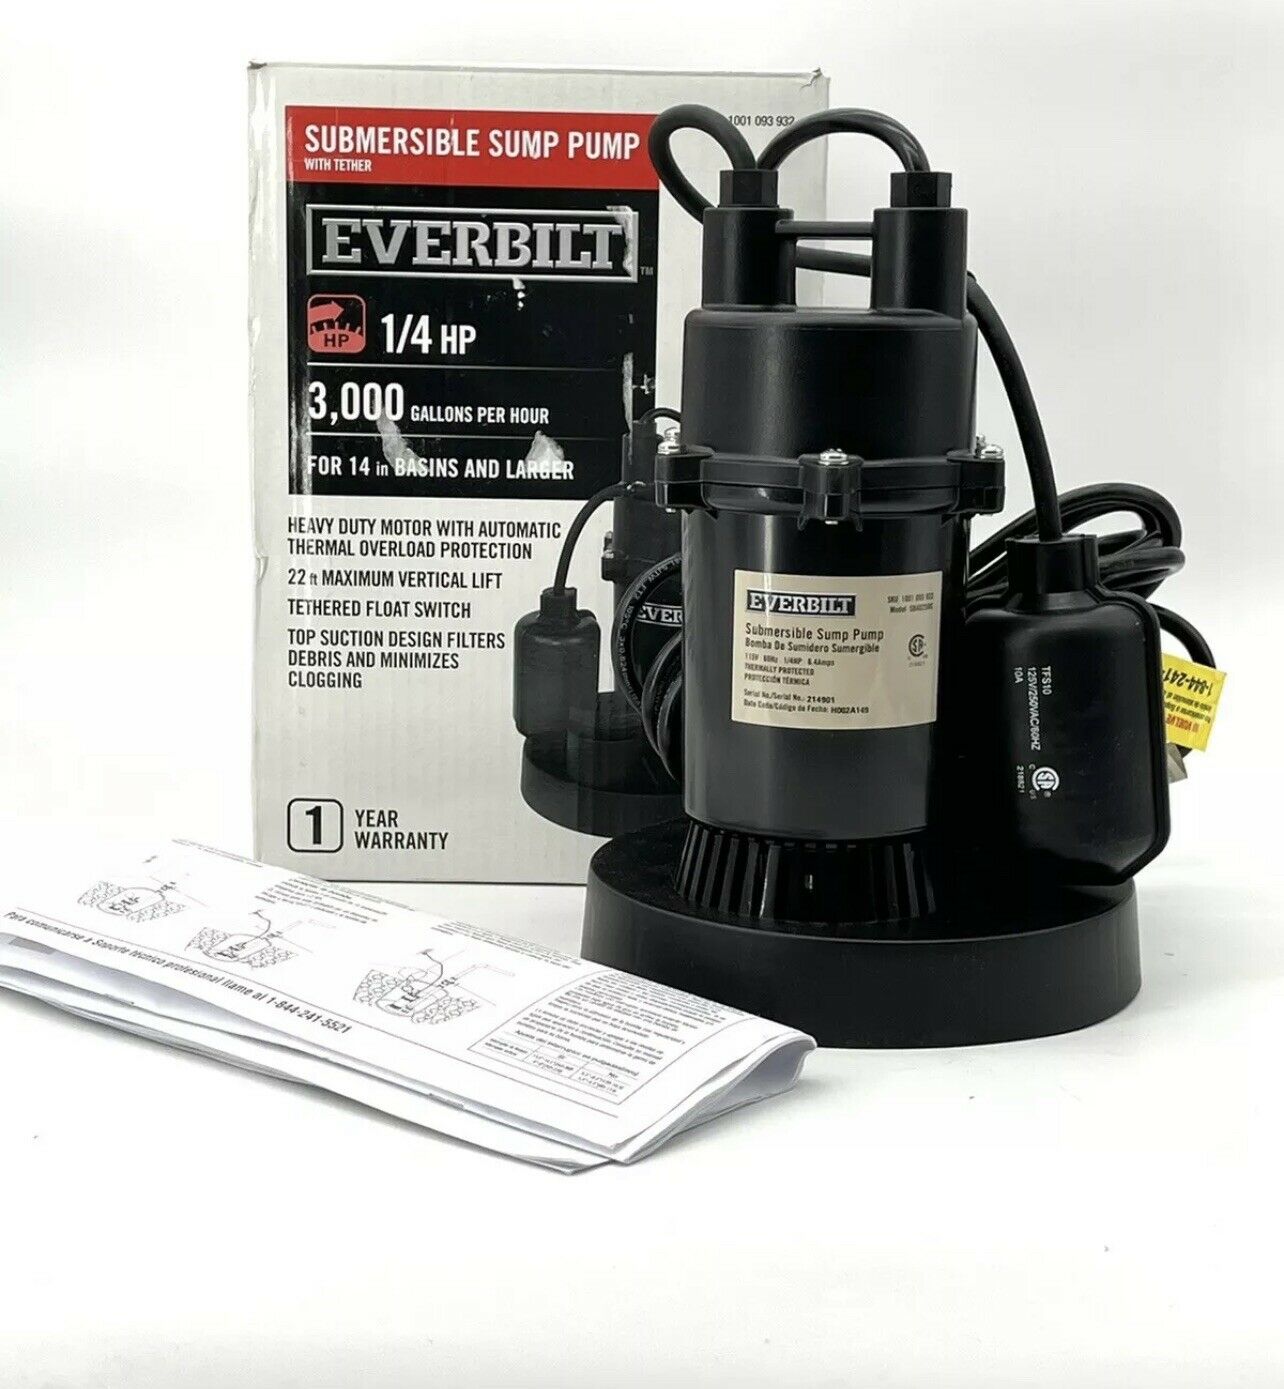 Sump Pump Submersible Aluminum 1/4 Hp With Tethered Float Switch By Everbilt